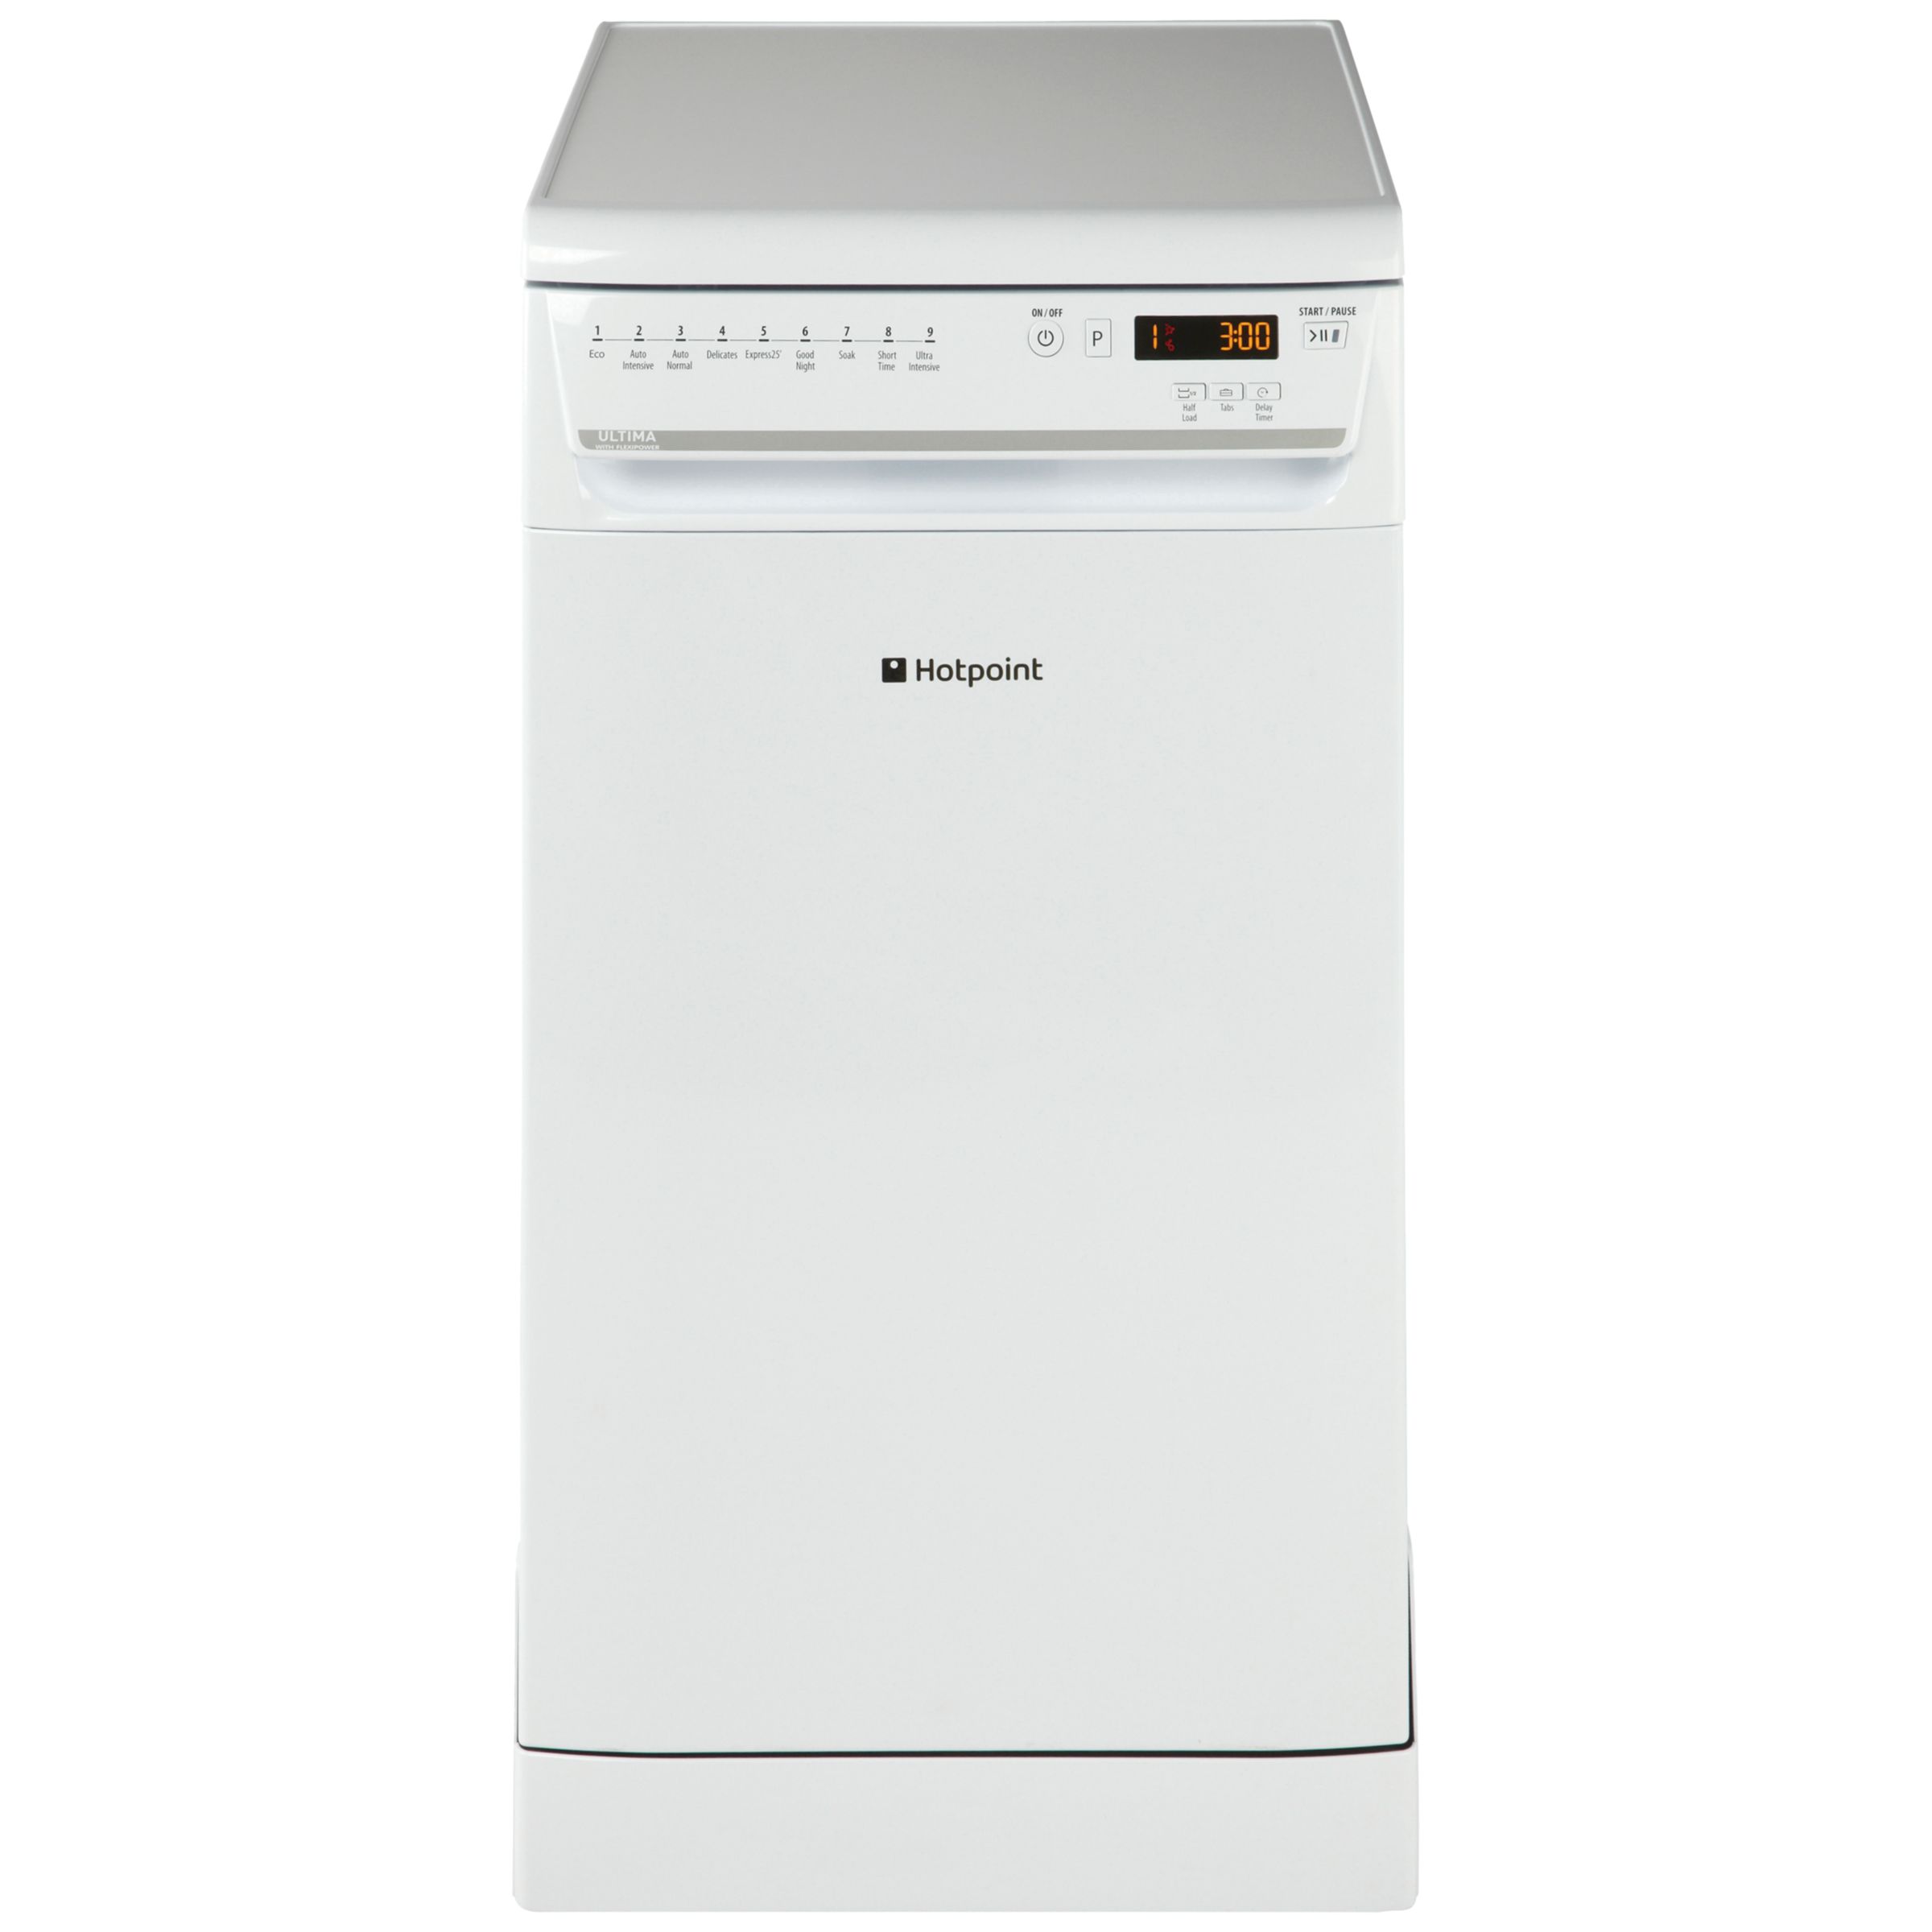 Hotpoint SIUF32120P Ultima Freestanding 